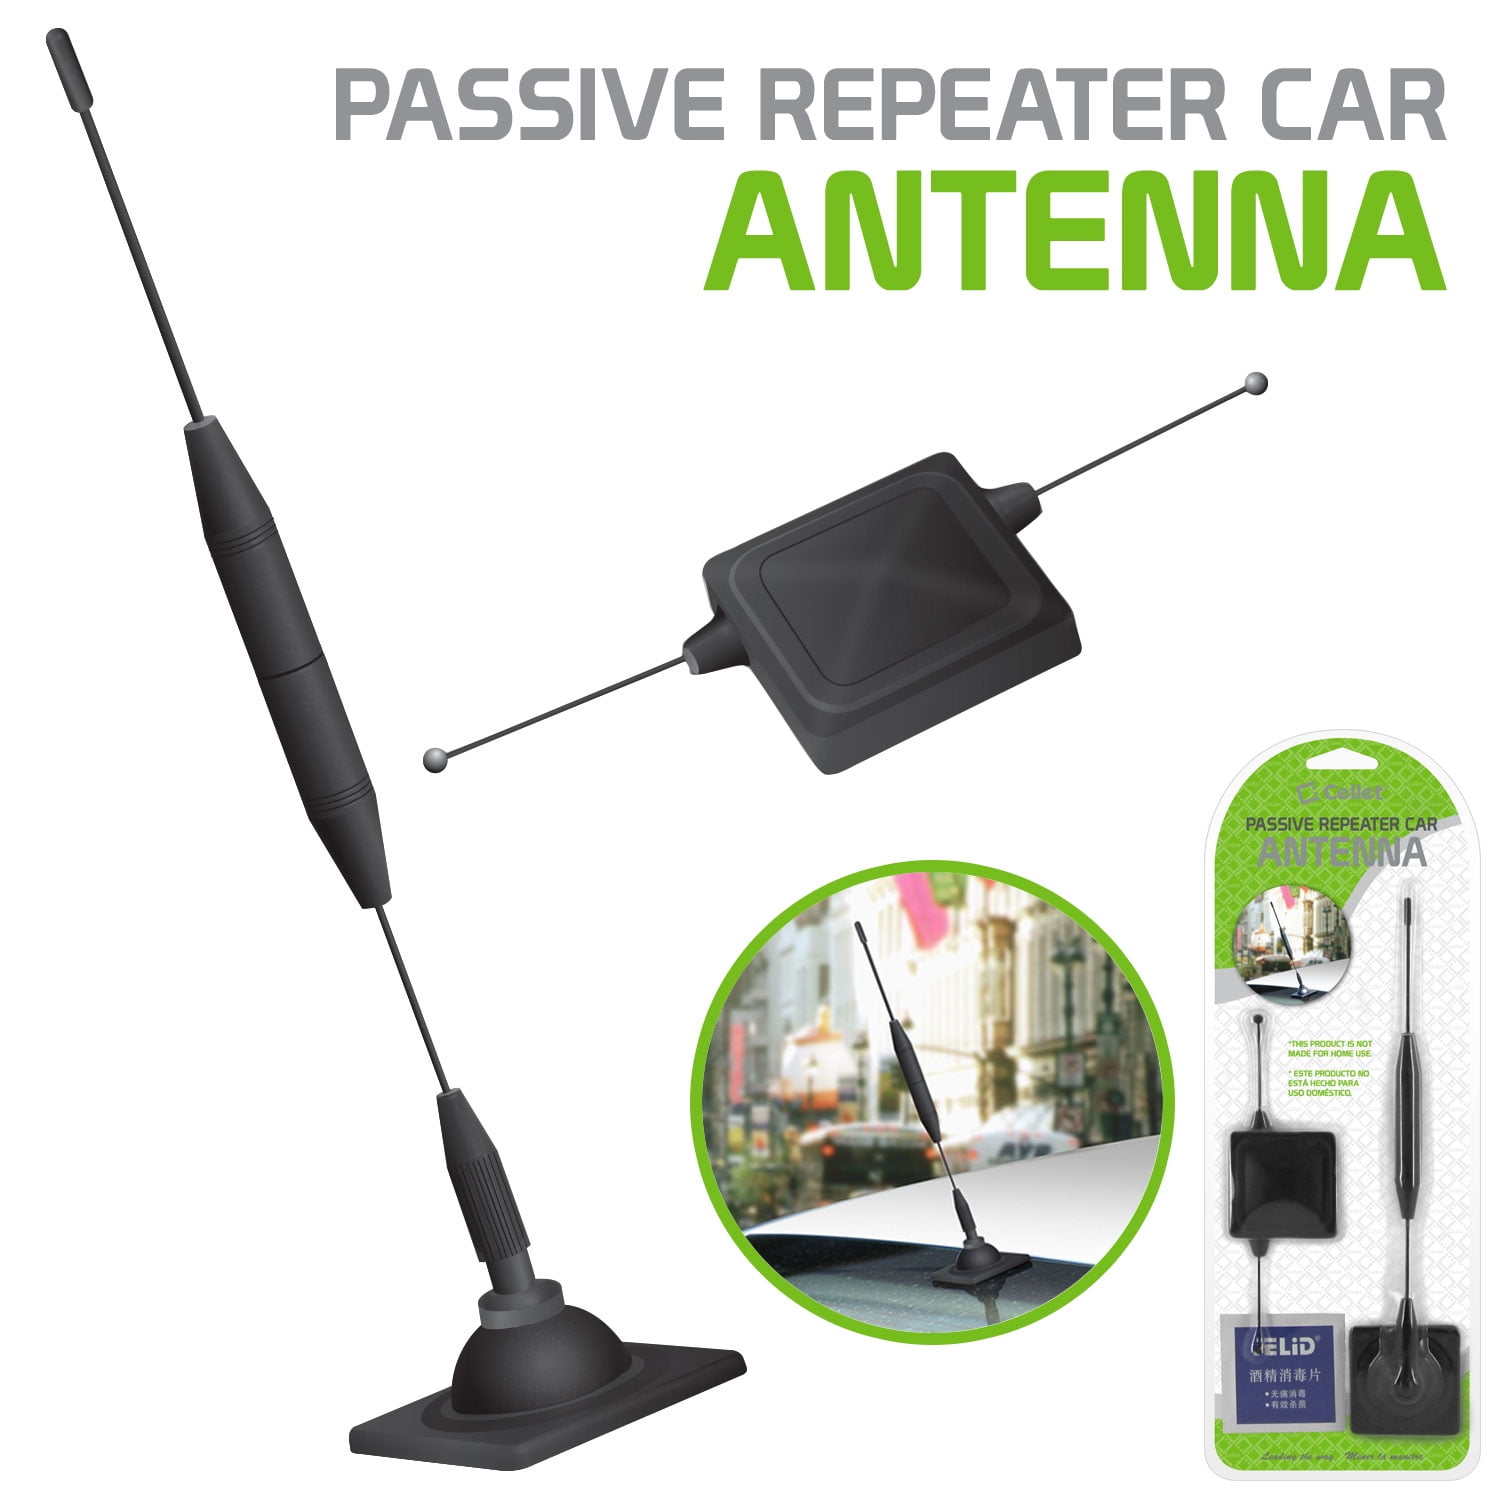 CELL PHONE SIGNAL BOOSTER EXTERNAL QUAD BAND CELLULAR ANTENNA FOR HOME HOUSE CAR 